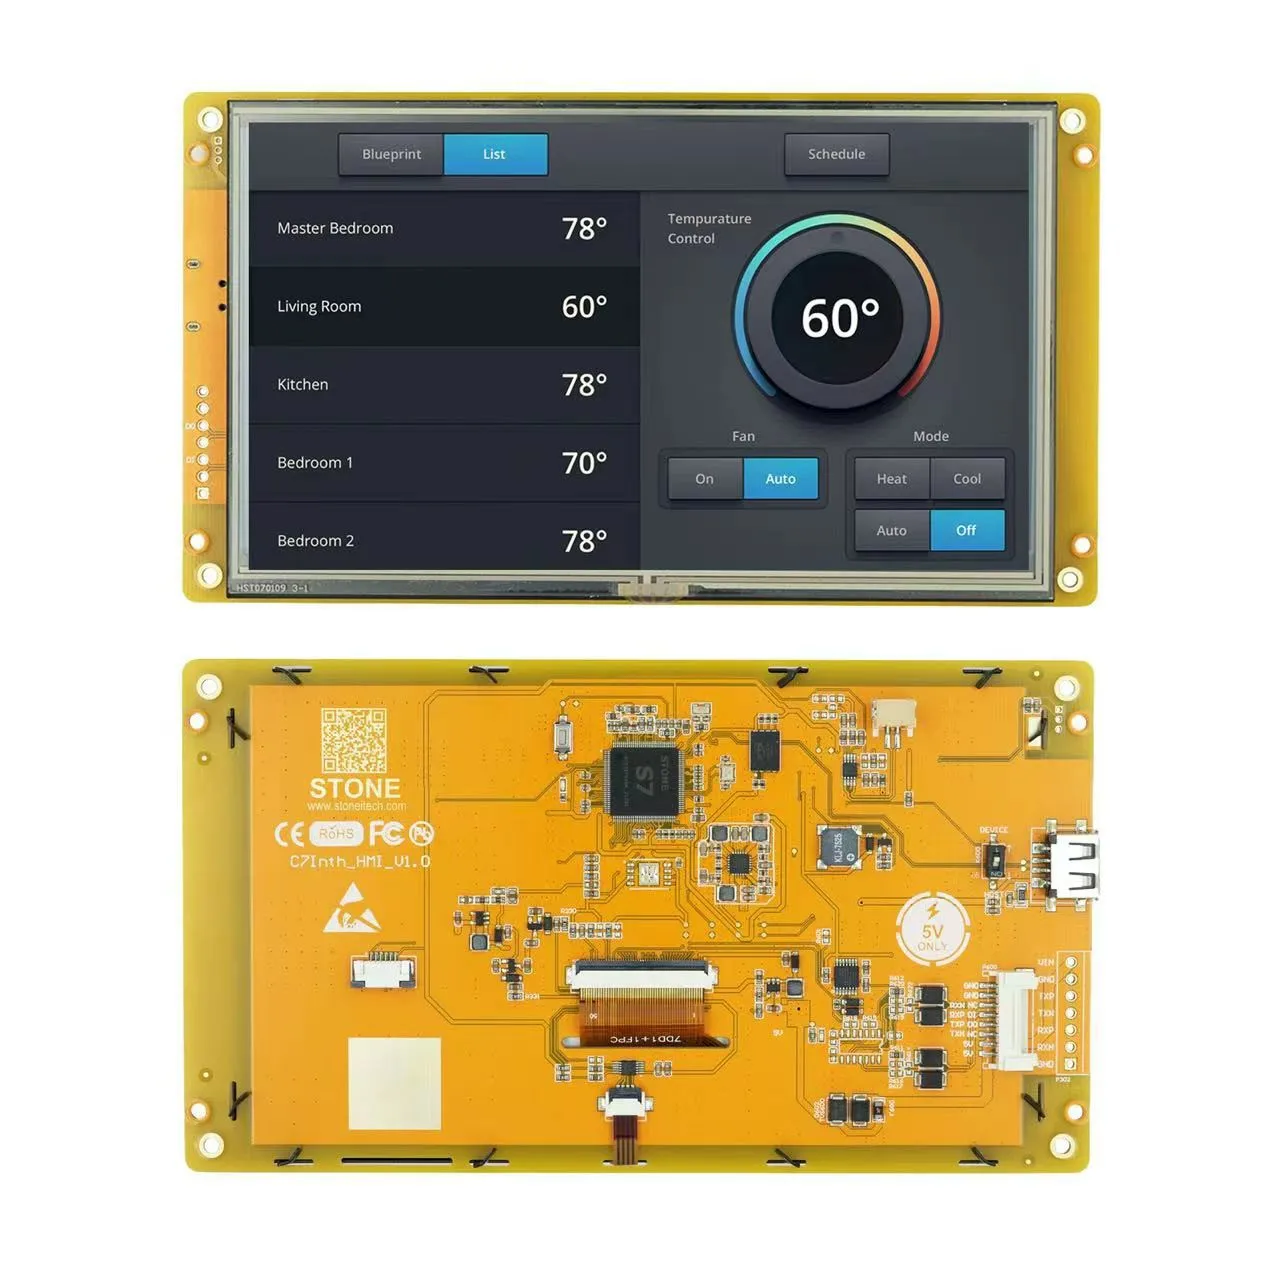 7.0 Inch Smart HMI complimentary GUI Software that makes programming fast and easy for engineers The LCD touch screen can easily